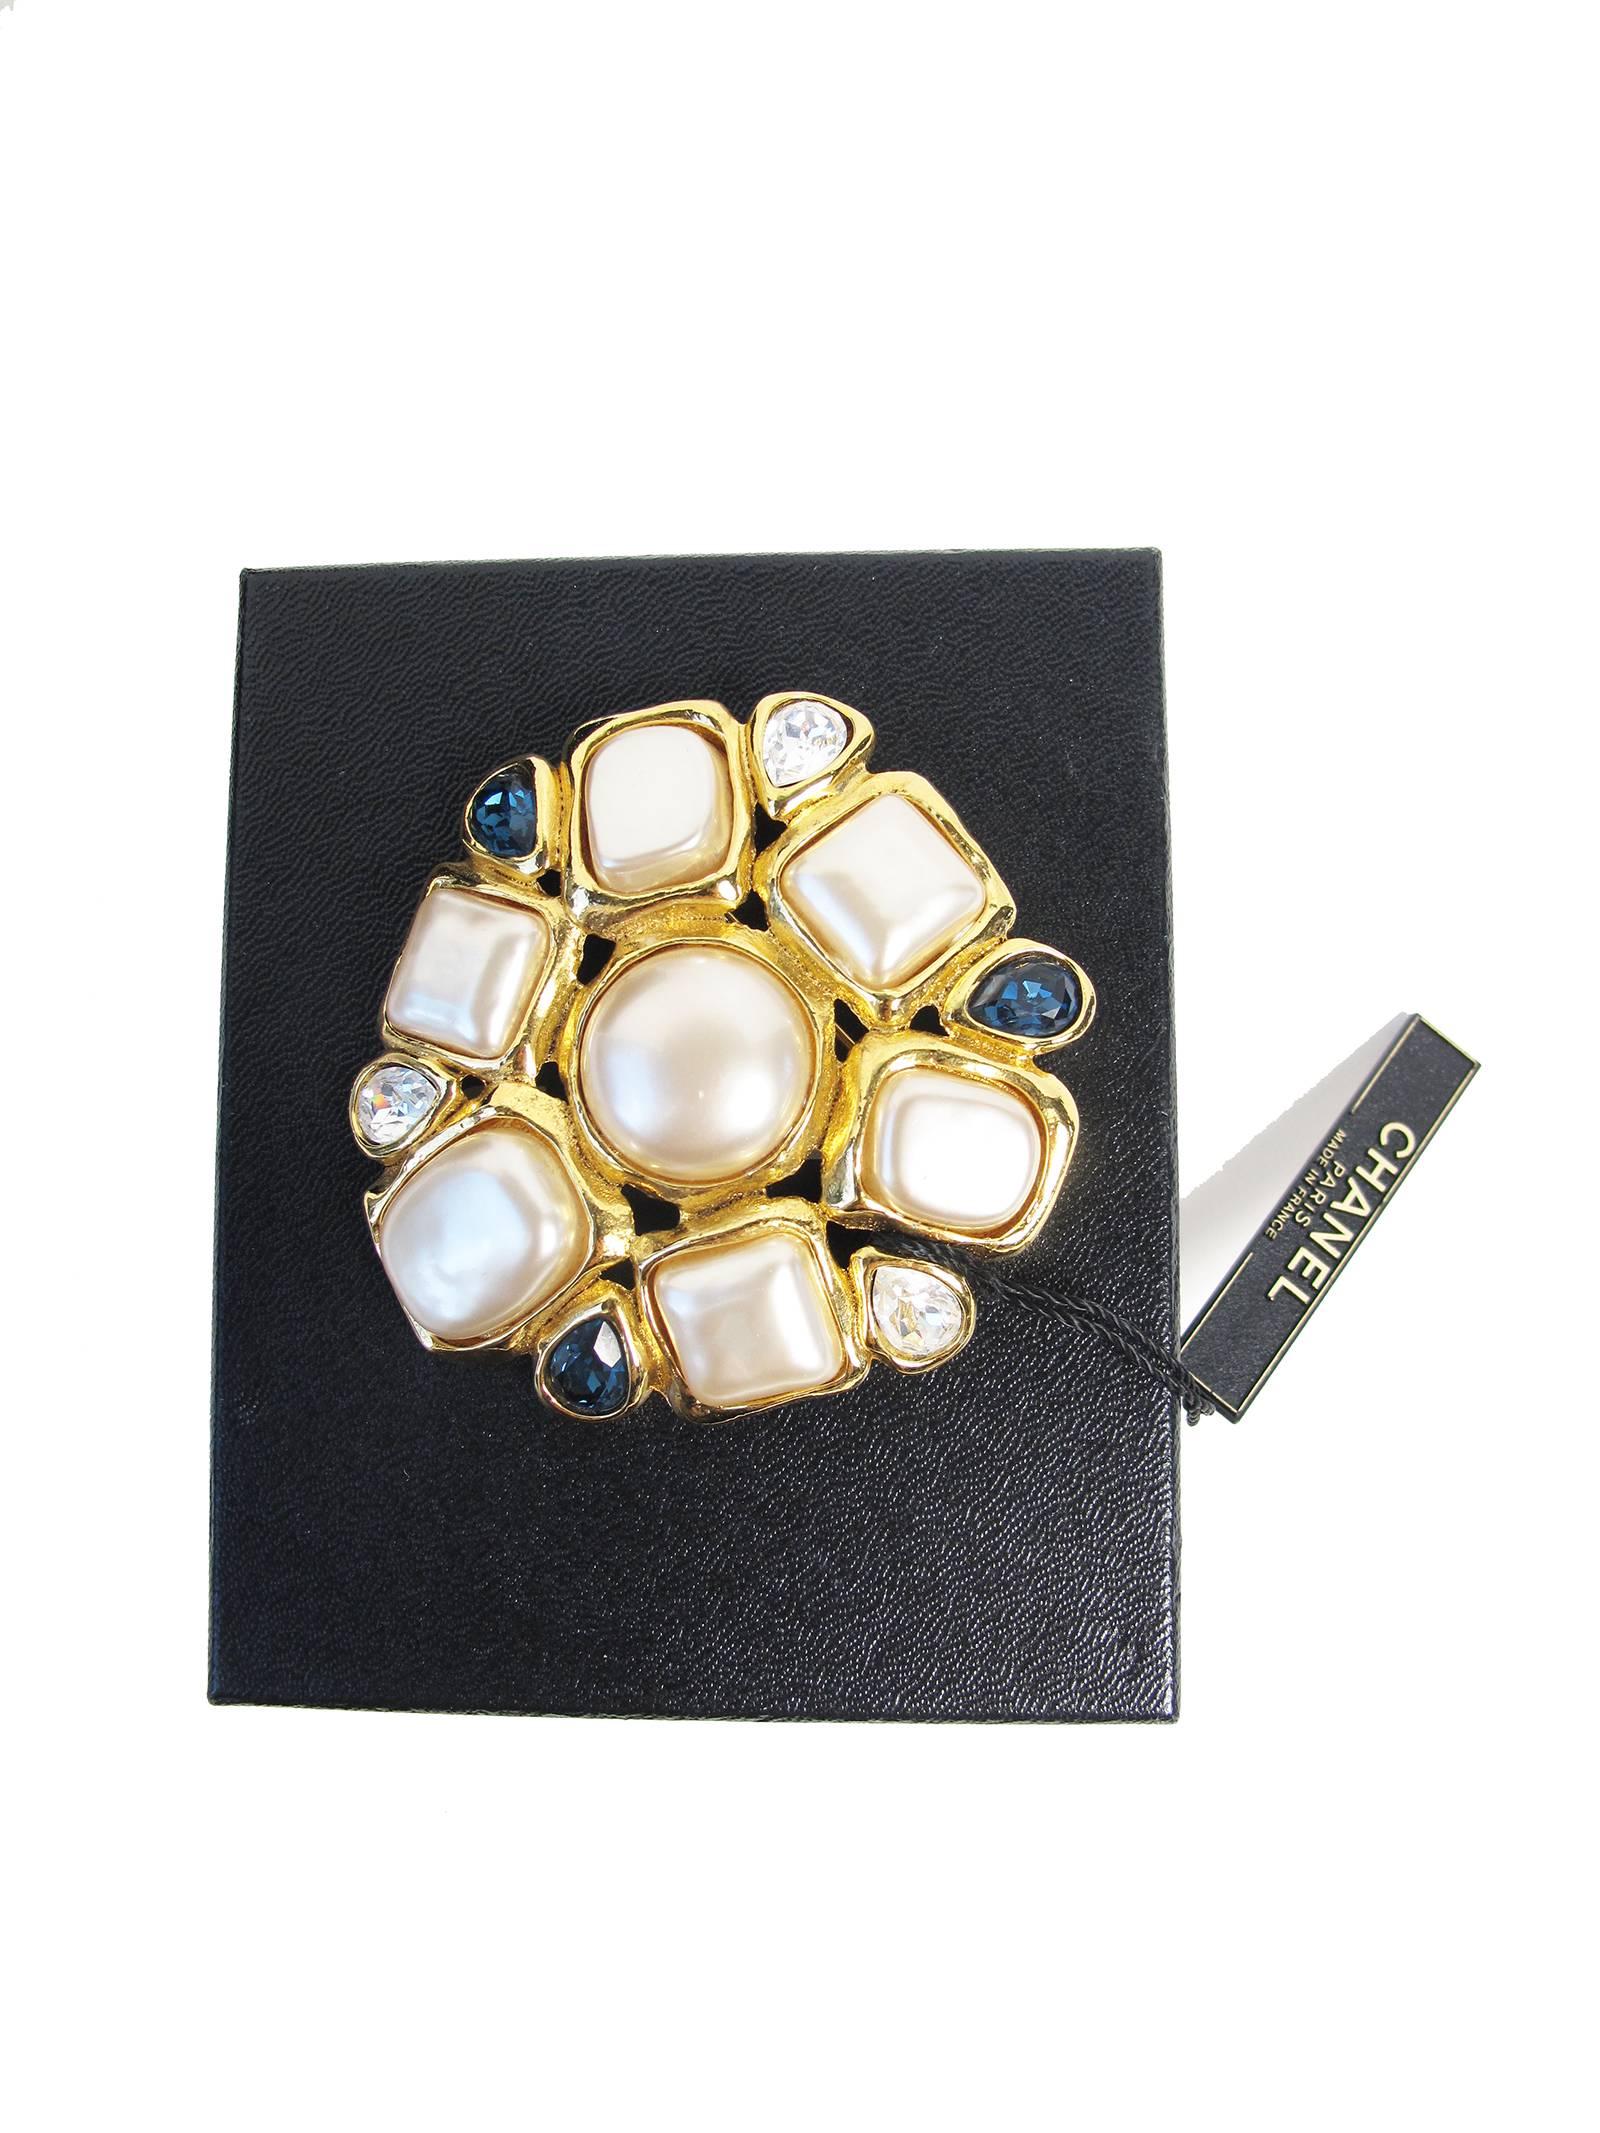 Chanel Faux Pearl and Gripoix Large Brooch 2